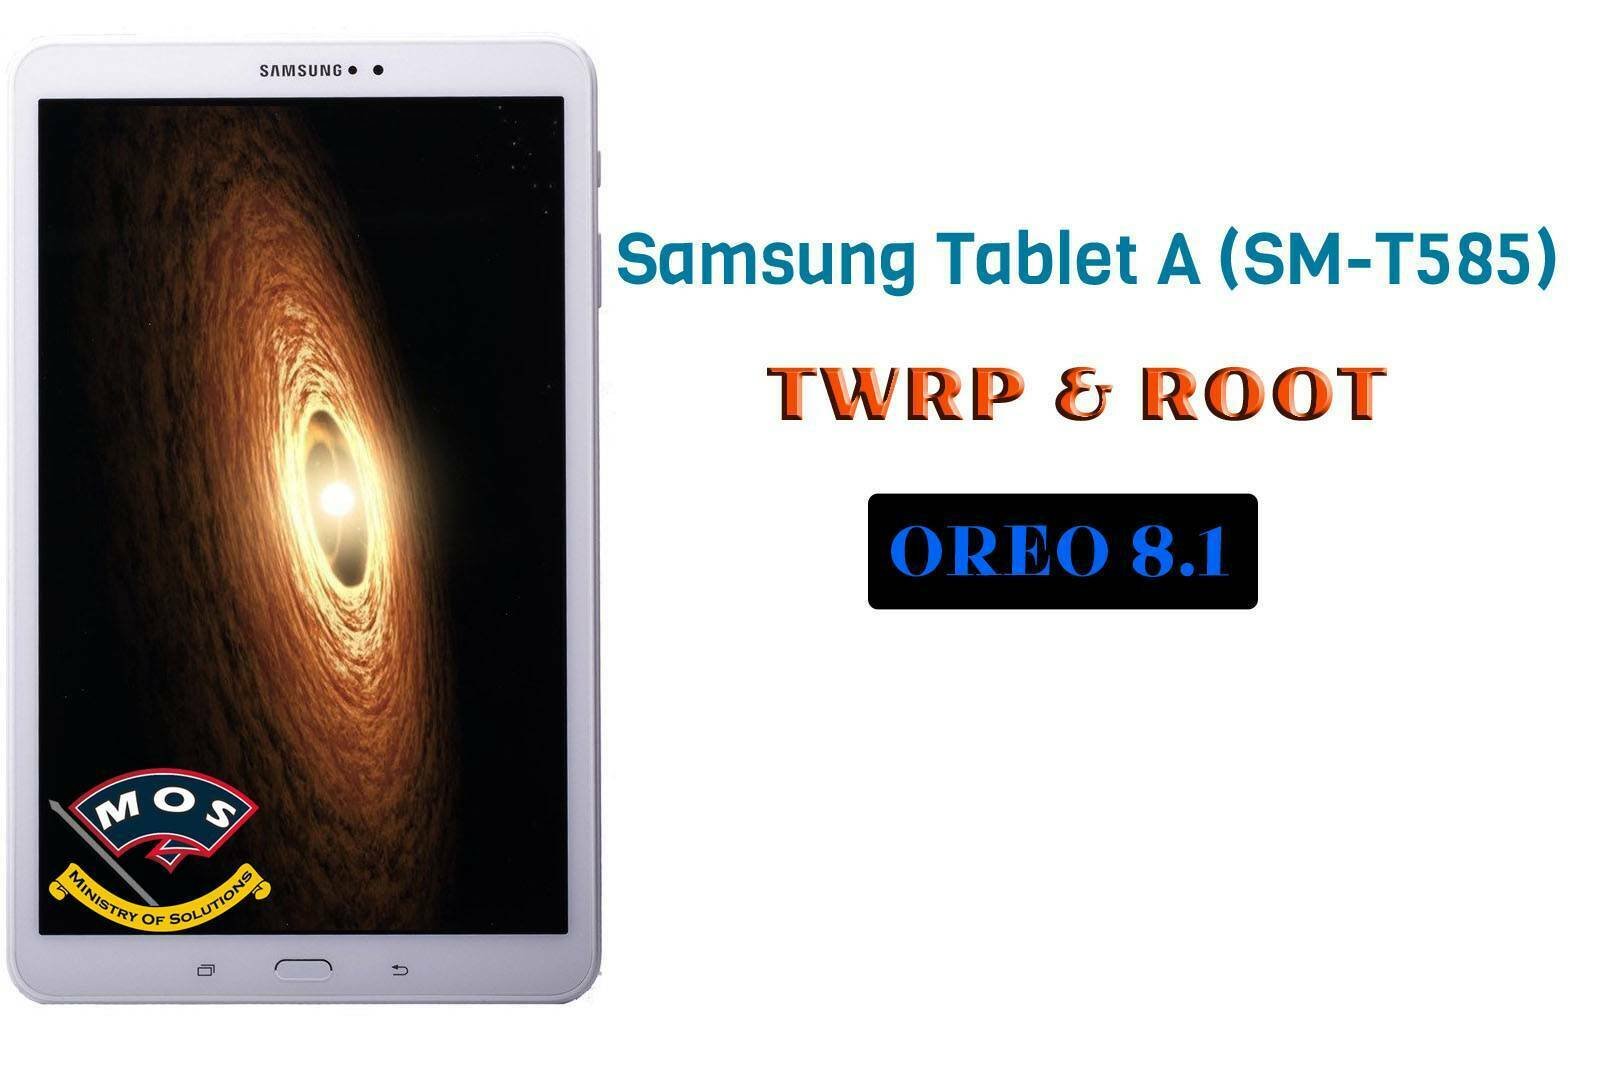 Samsung Tablet A Sm T585 Twrp And Root Oreo 8 1 Ministry Of